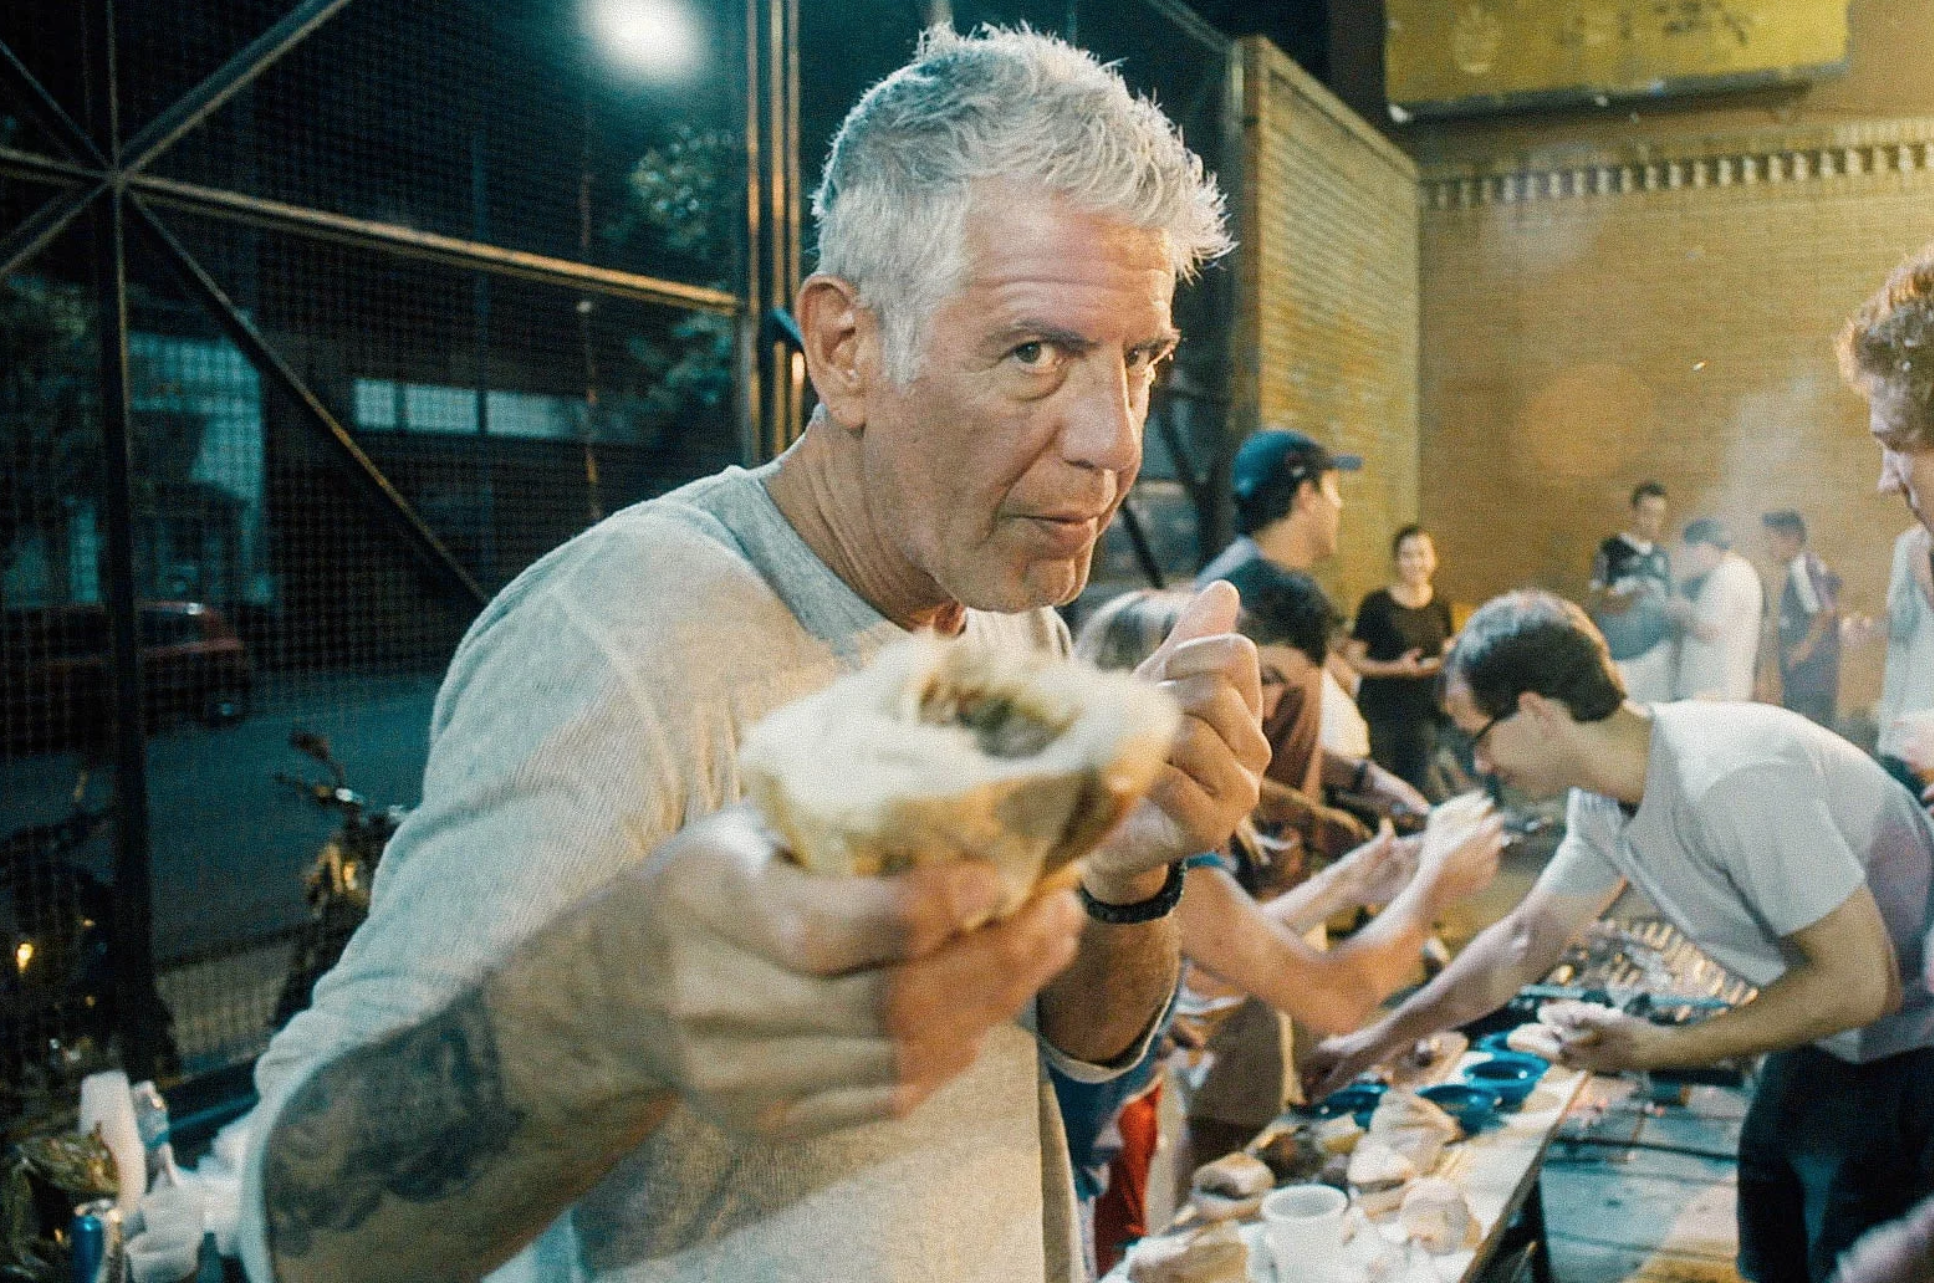 Things to do in Long Beach this weekend including... block parties and Anthony Bourdain • the Hi-lo